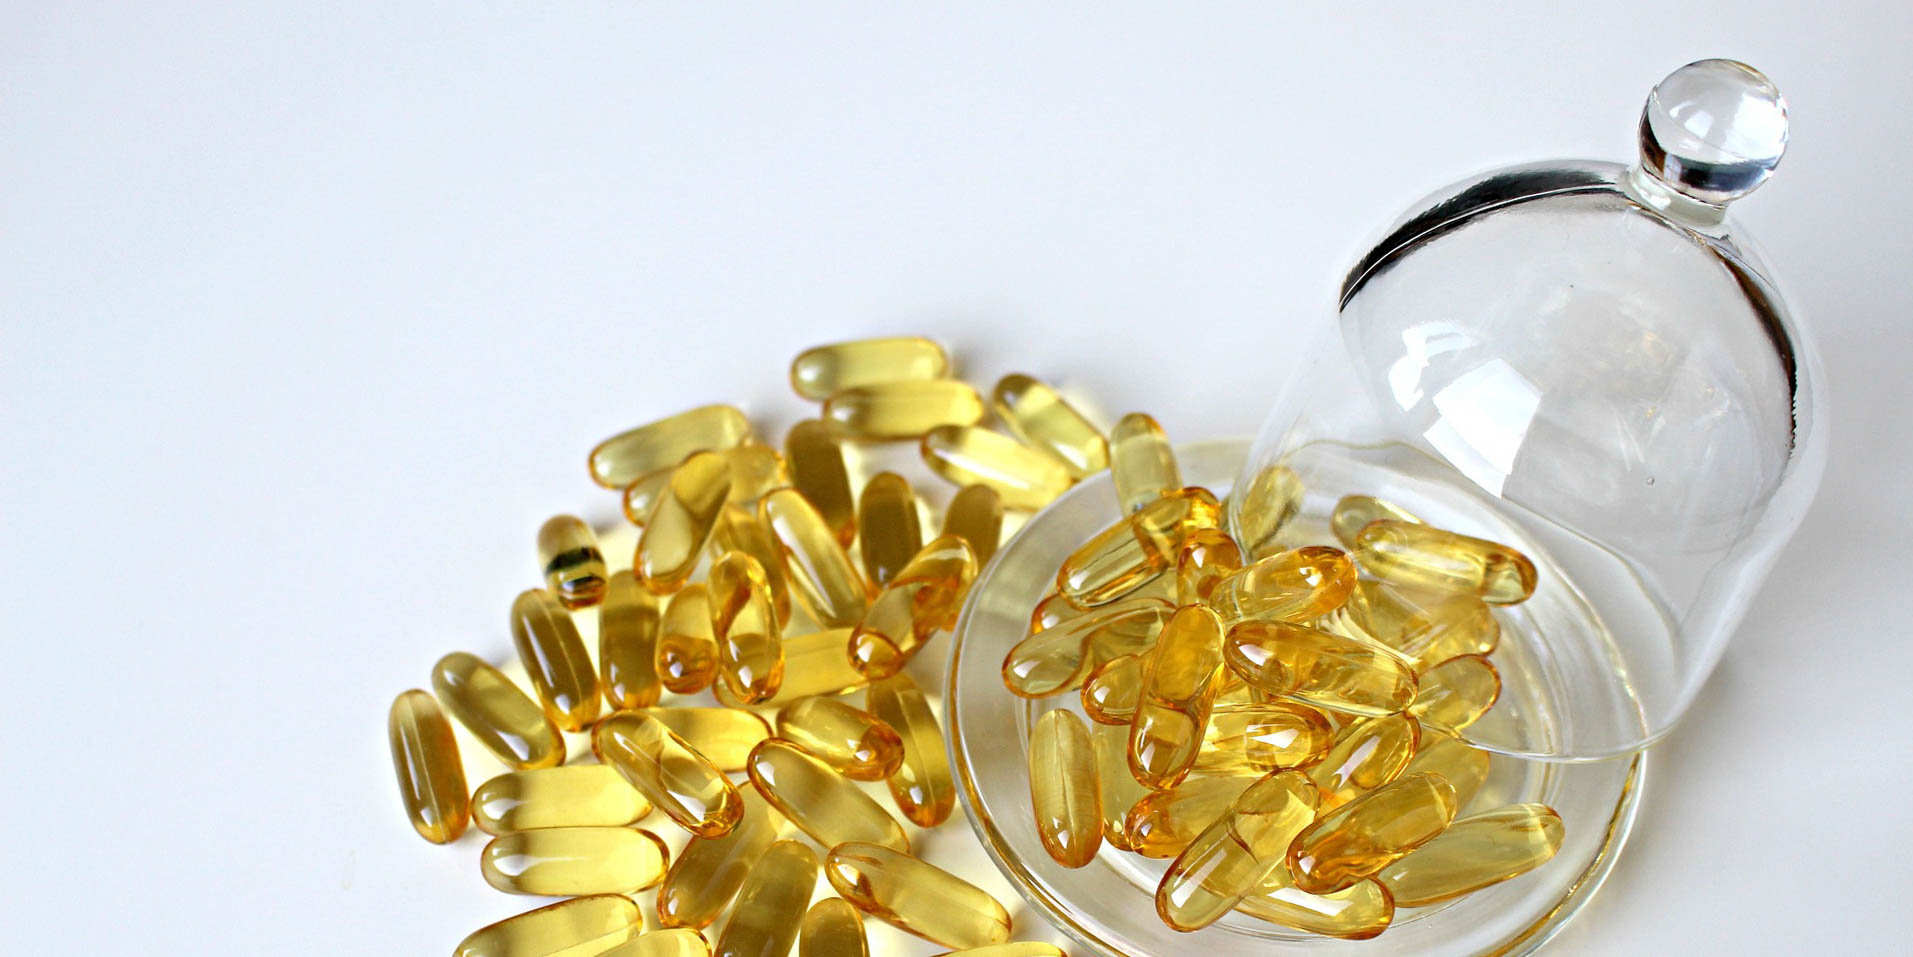 Fish oil supplements anti-inflammatory properties and omega-3 fatty acids EPA and DHA